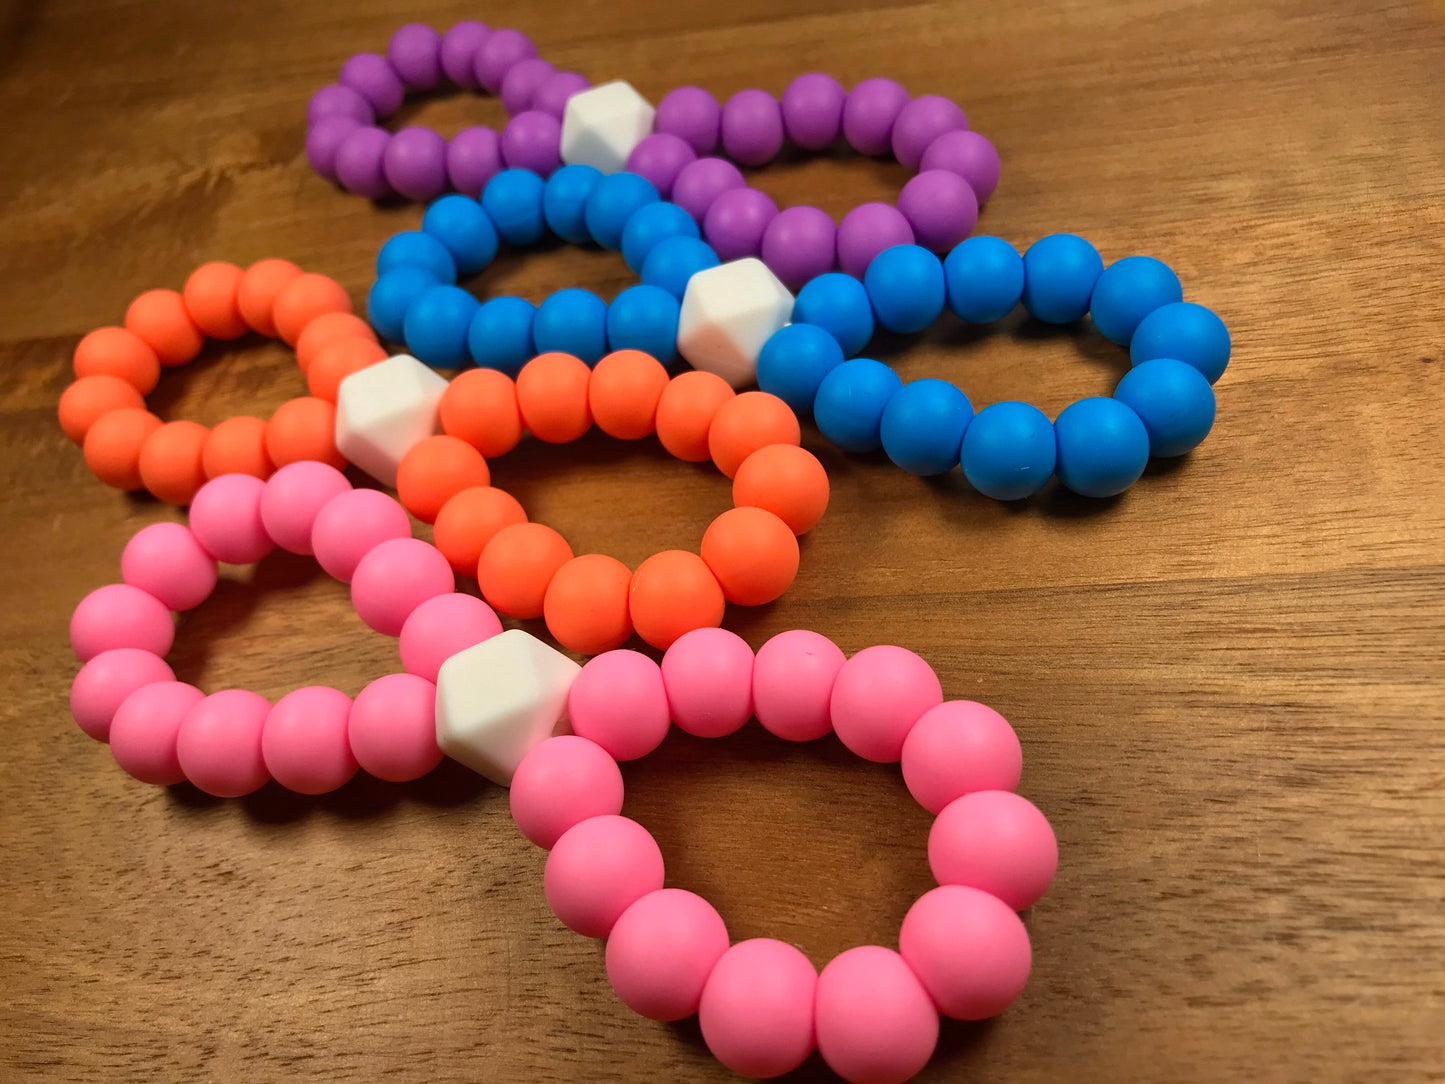 Silicone Teethers - Bright Infinity